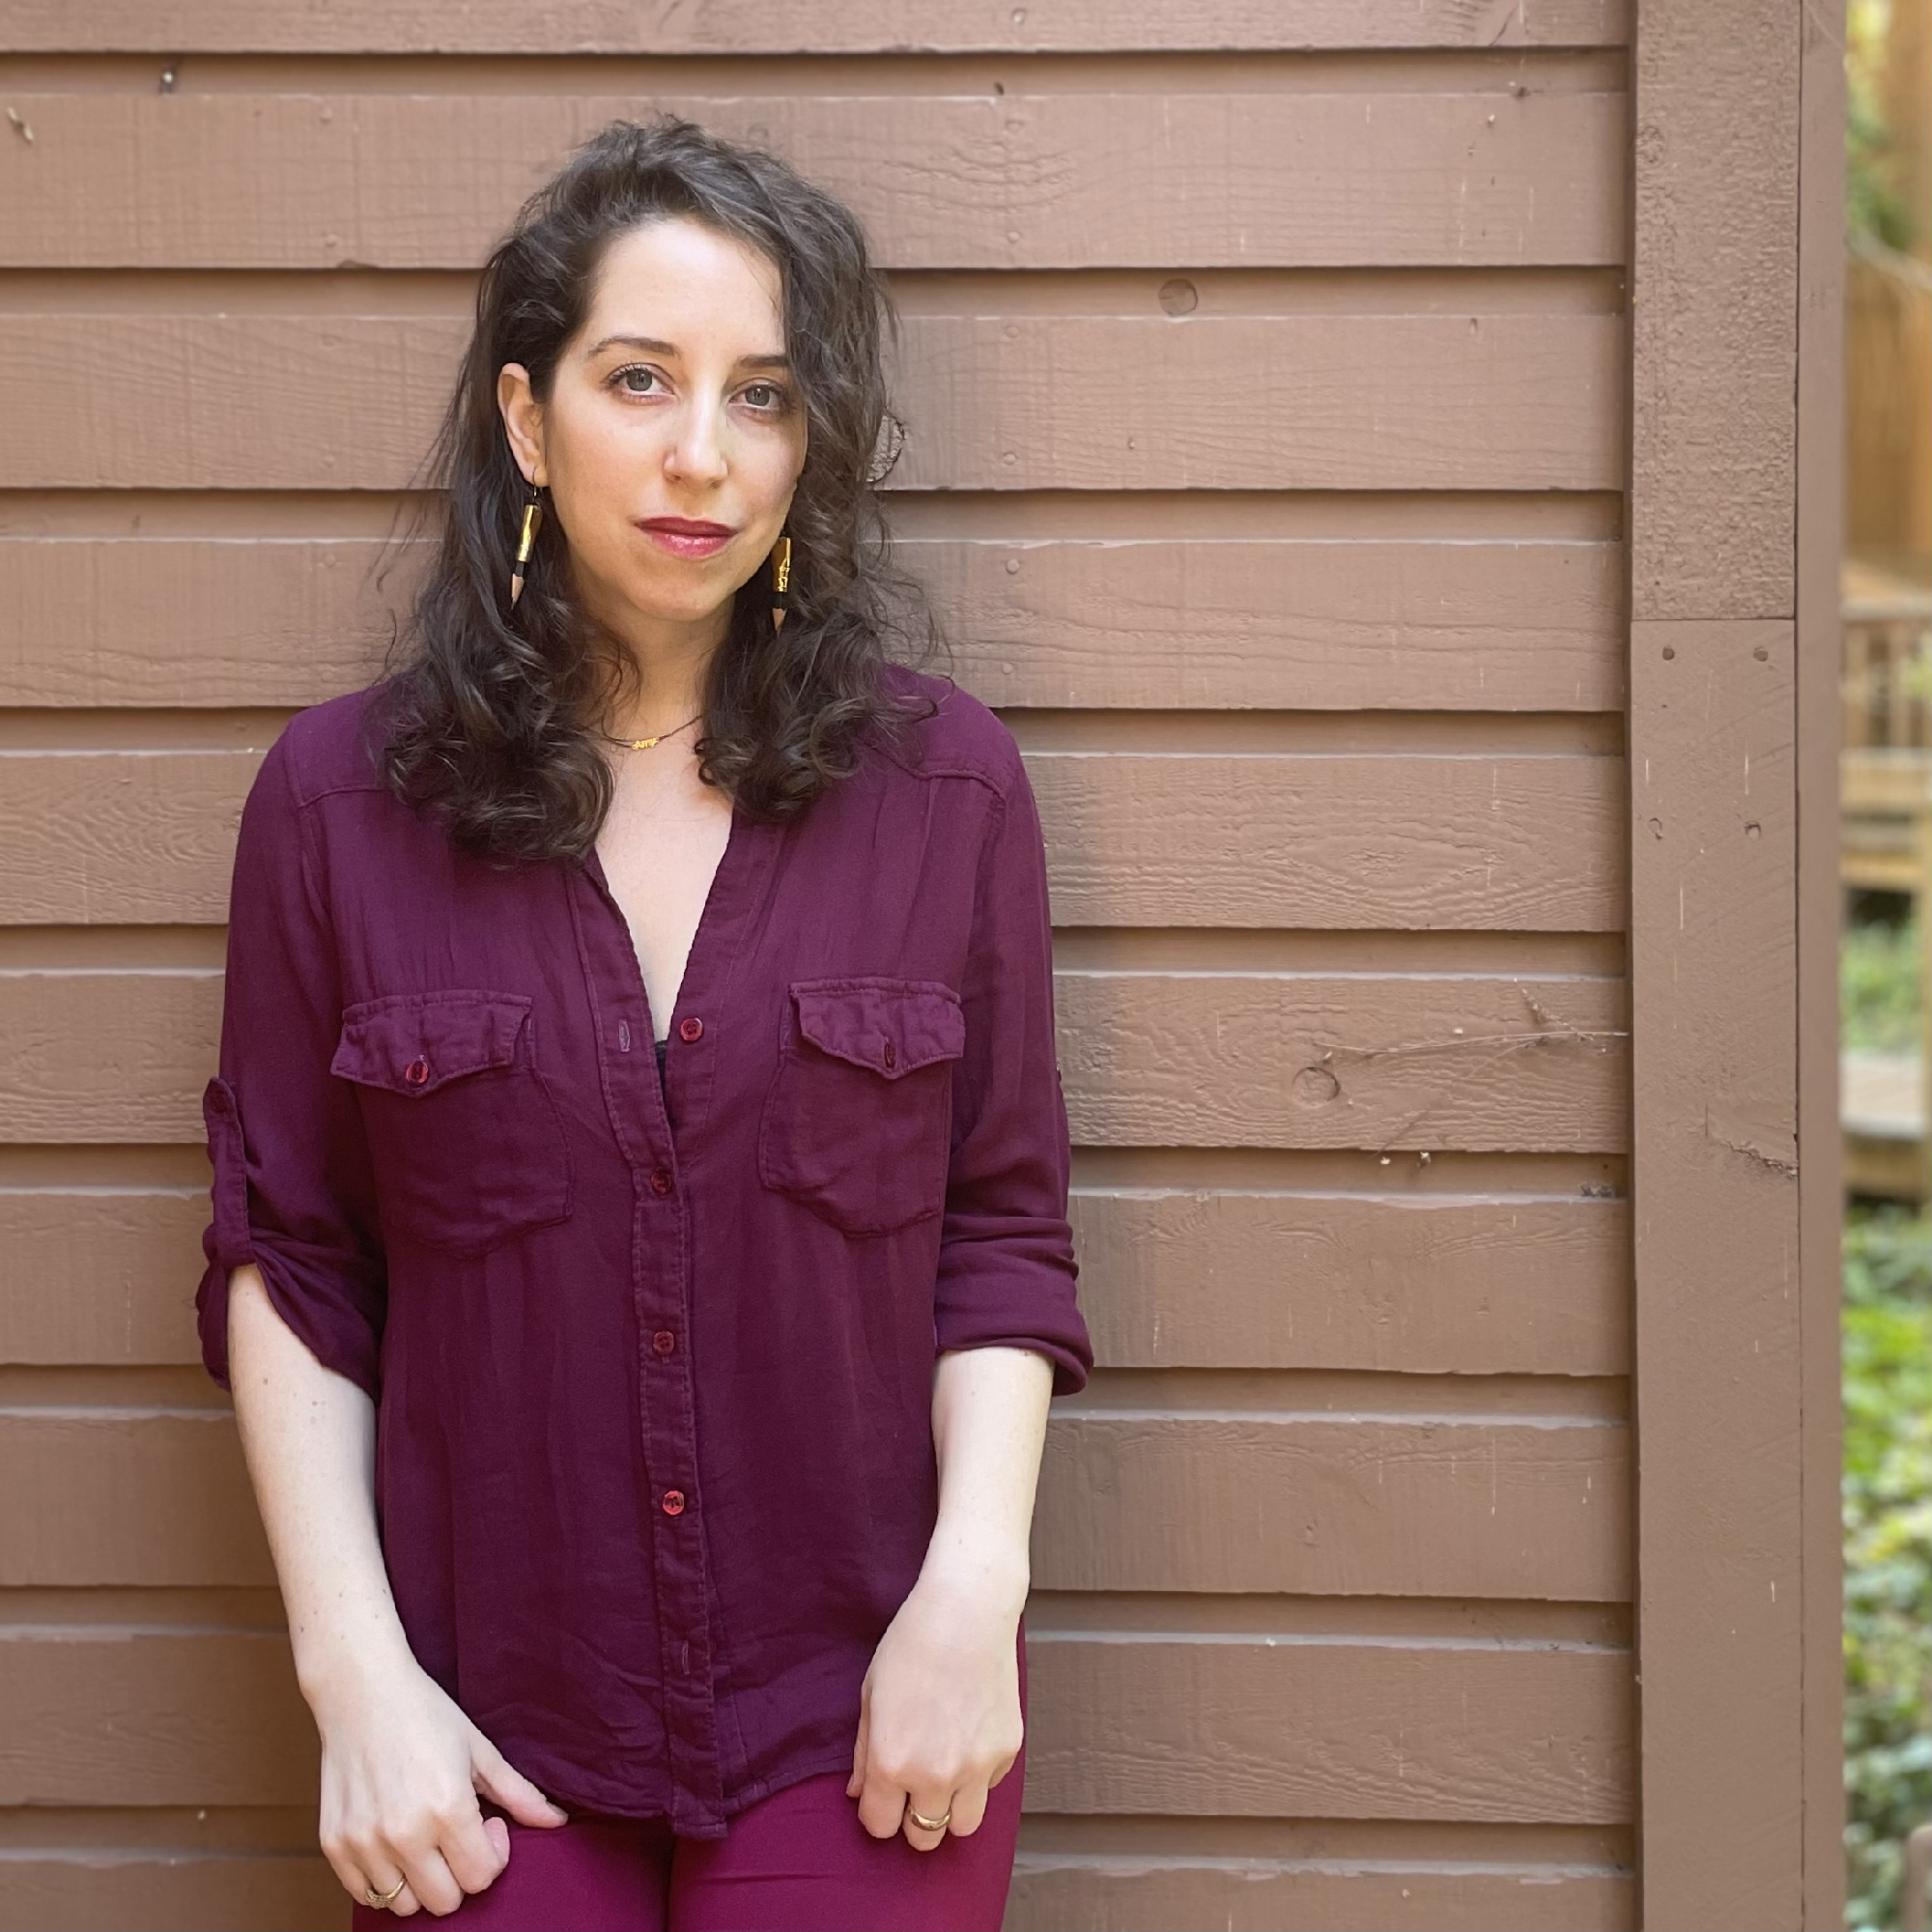 White woman with brown hair in dark purple shirt leans against wooden wall